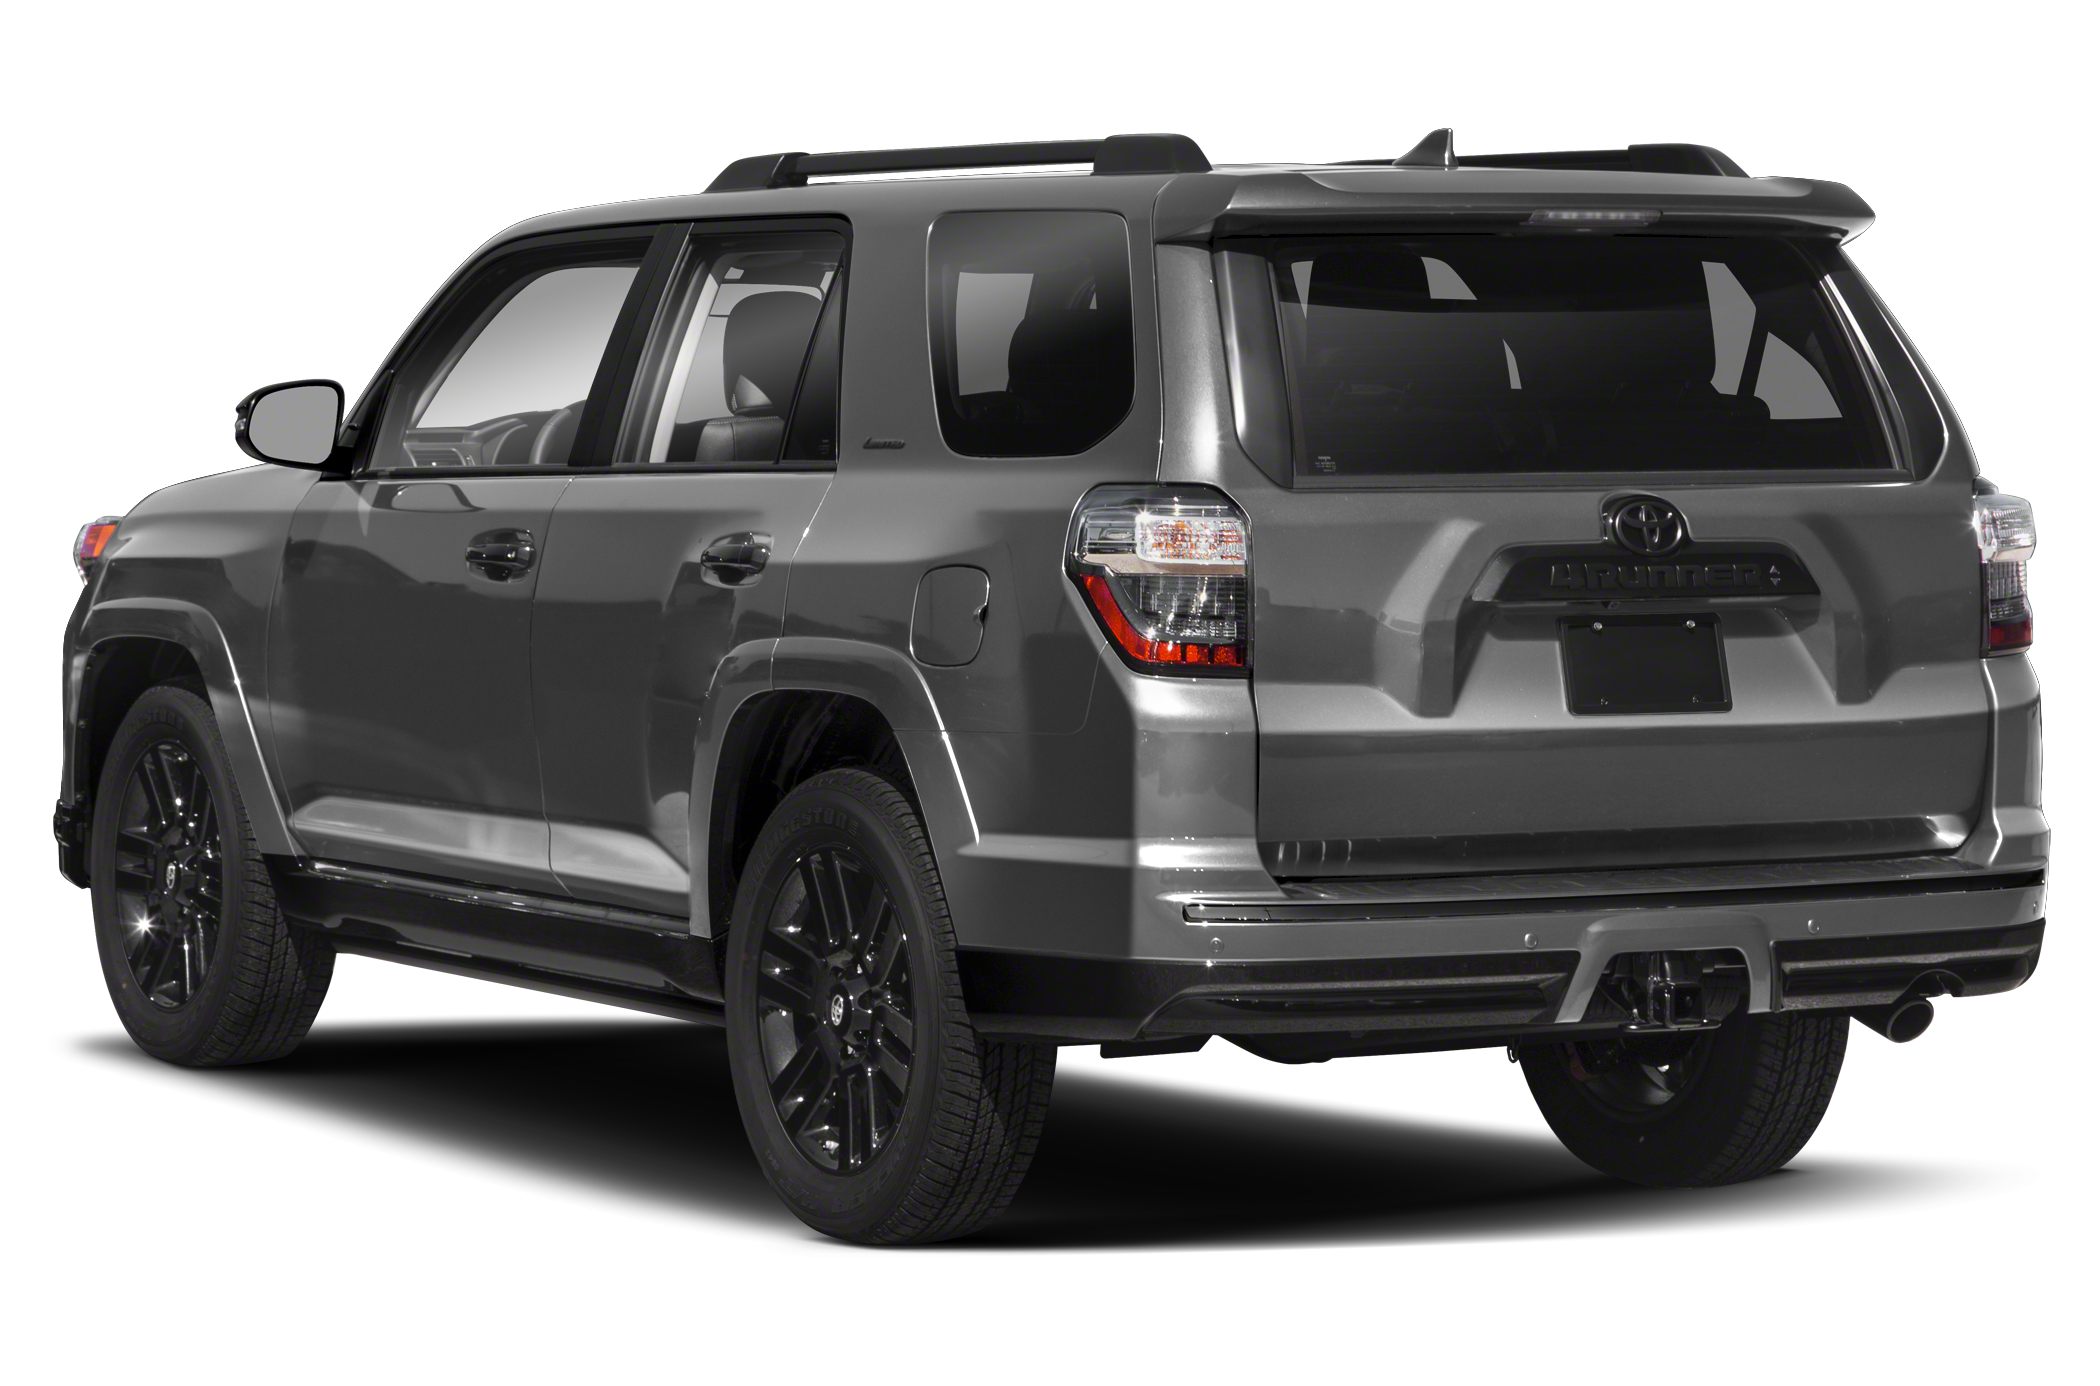 2021 Toyota 4Runner Nightshade 4dr 4x4 Pictures